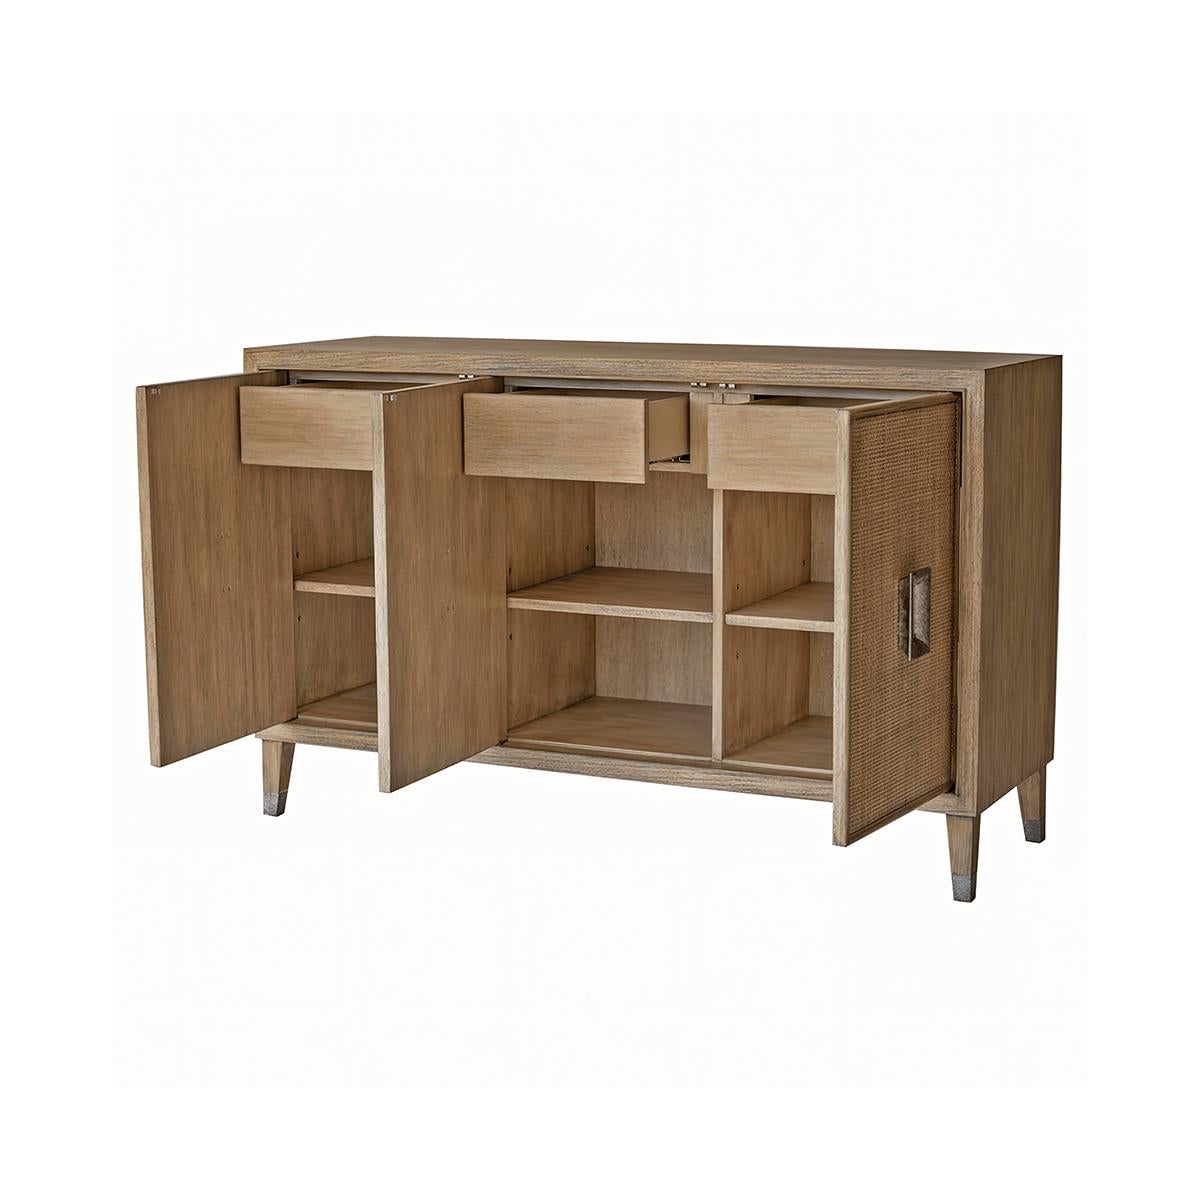 Mid-Century Modern Cerused Credenza. The three-door credenza has a neutral cerused hand finish, with wire brush texture and grey subtle highlights to the Celtis woods.

With three doors that open to reveal a fitted interior of three drawers and